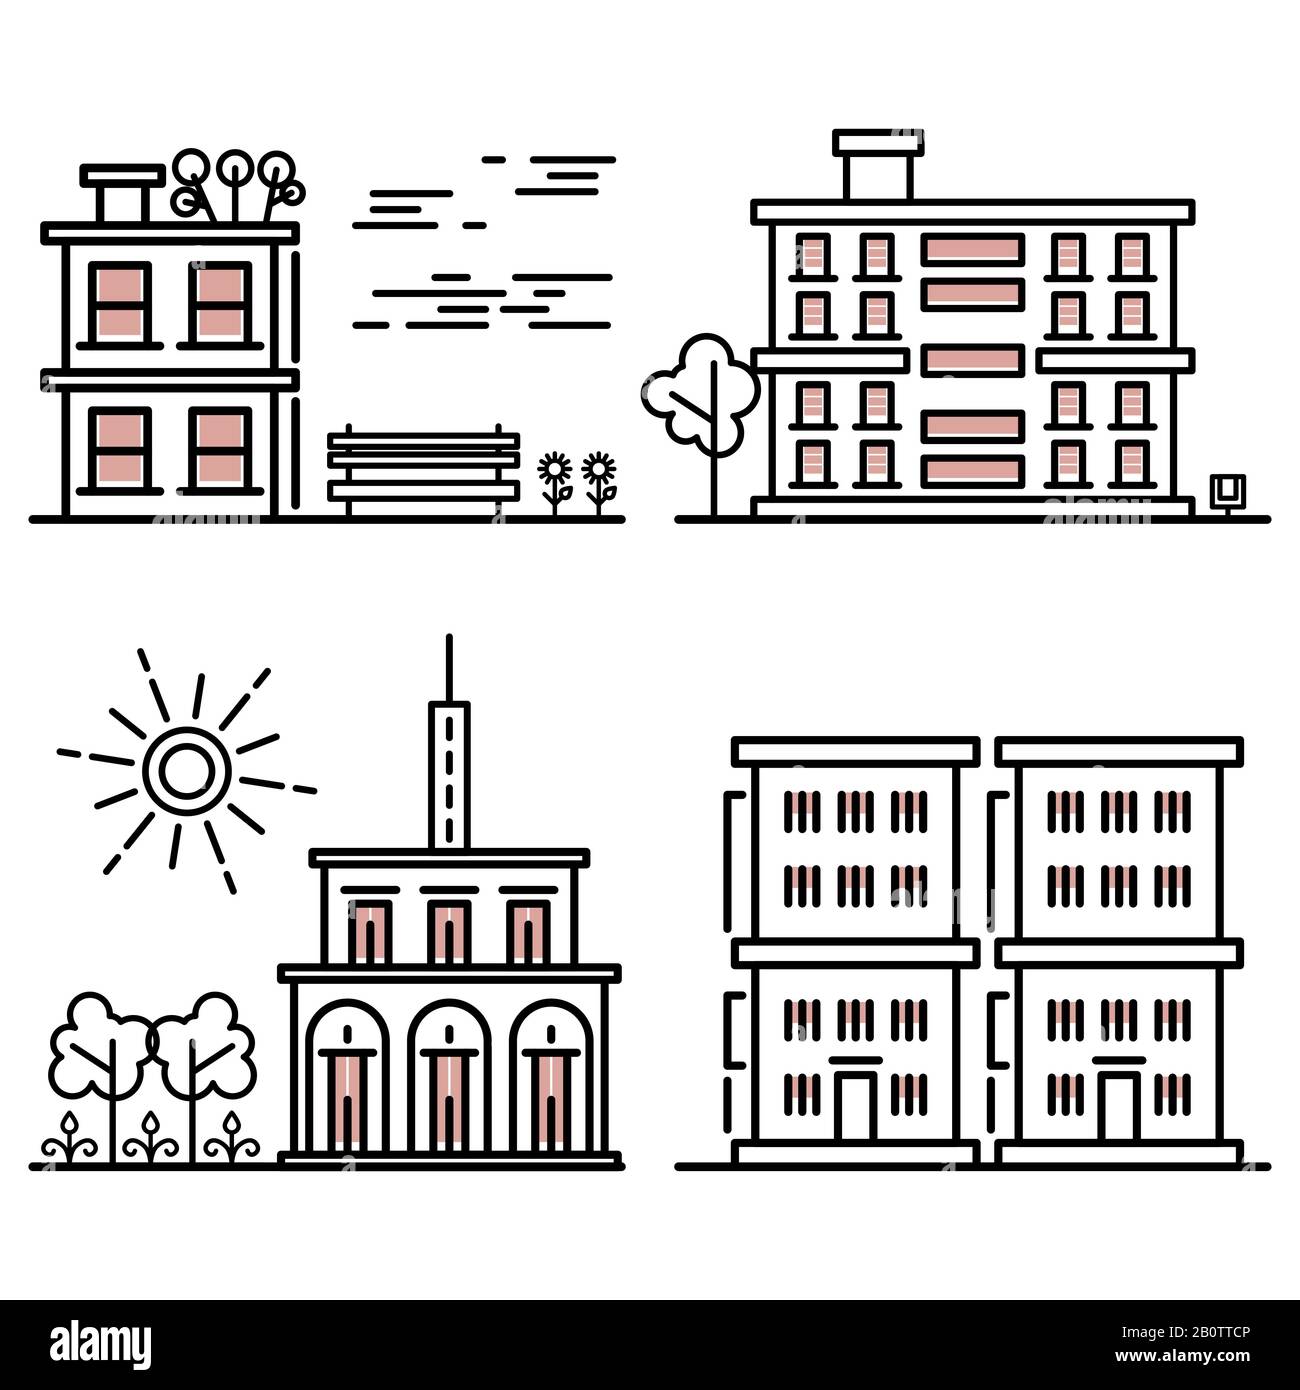 Line art houses collection - city objects with nature elements. Linear buildings illustration Stock Vector